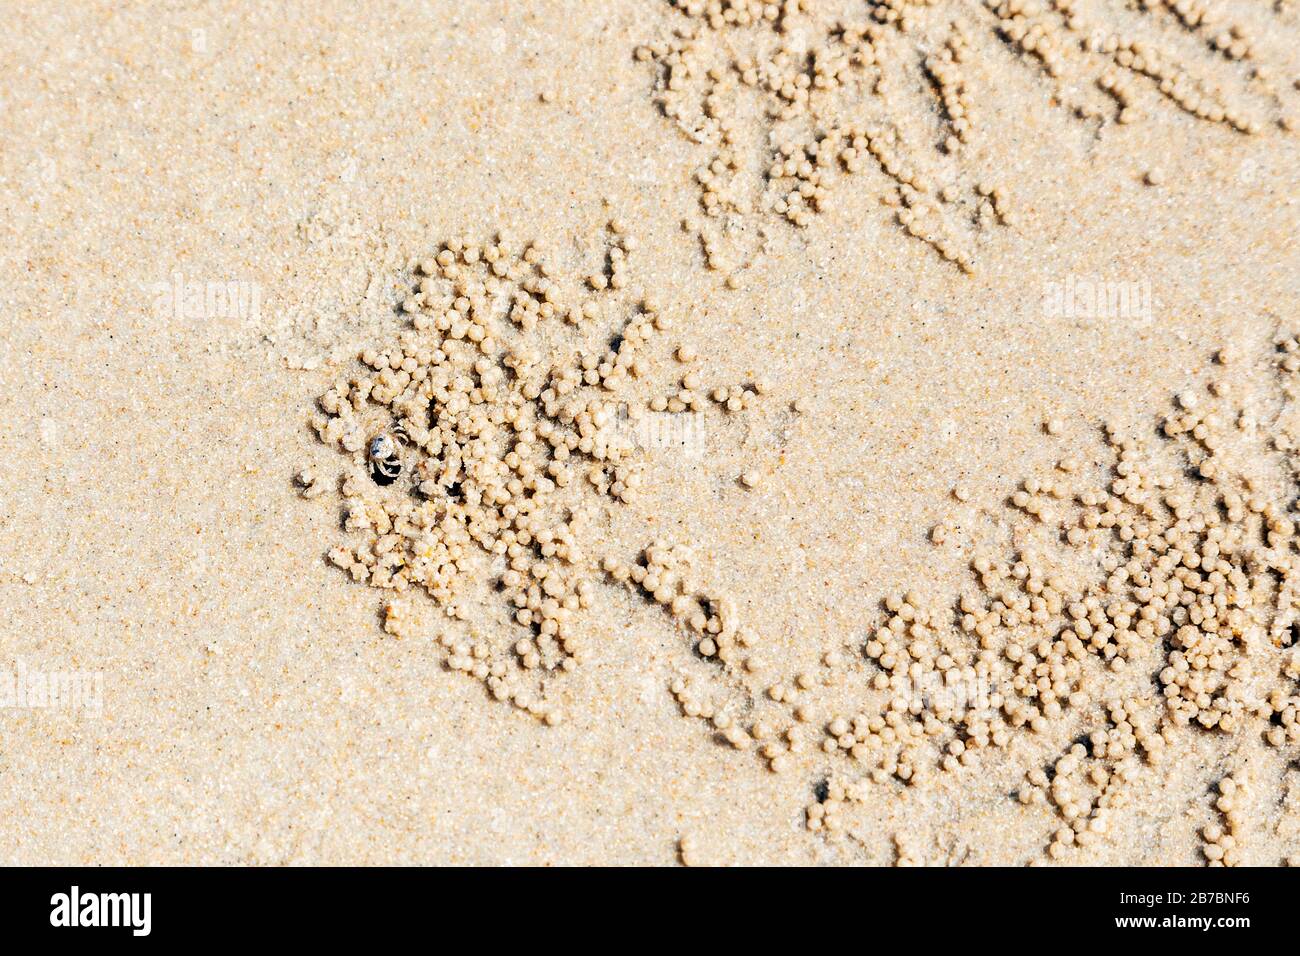 Sand Bubbler crab in burrow and with the feeding sand balls, in the indo-pacific beach at Andaman beach, Langkawi, Malaysia, Asia. Stock Photo